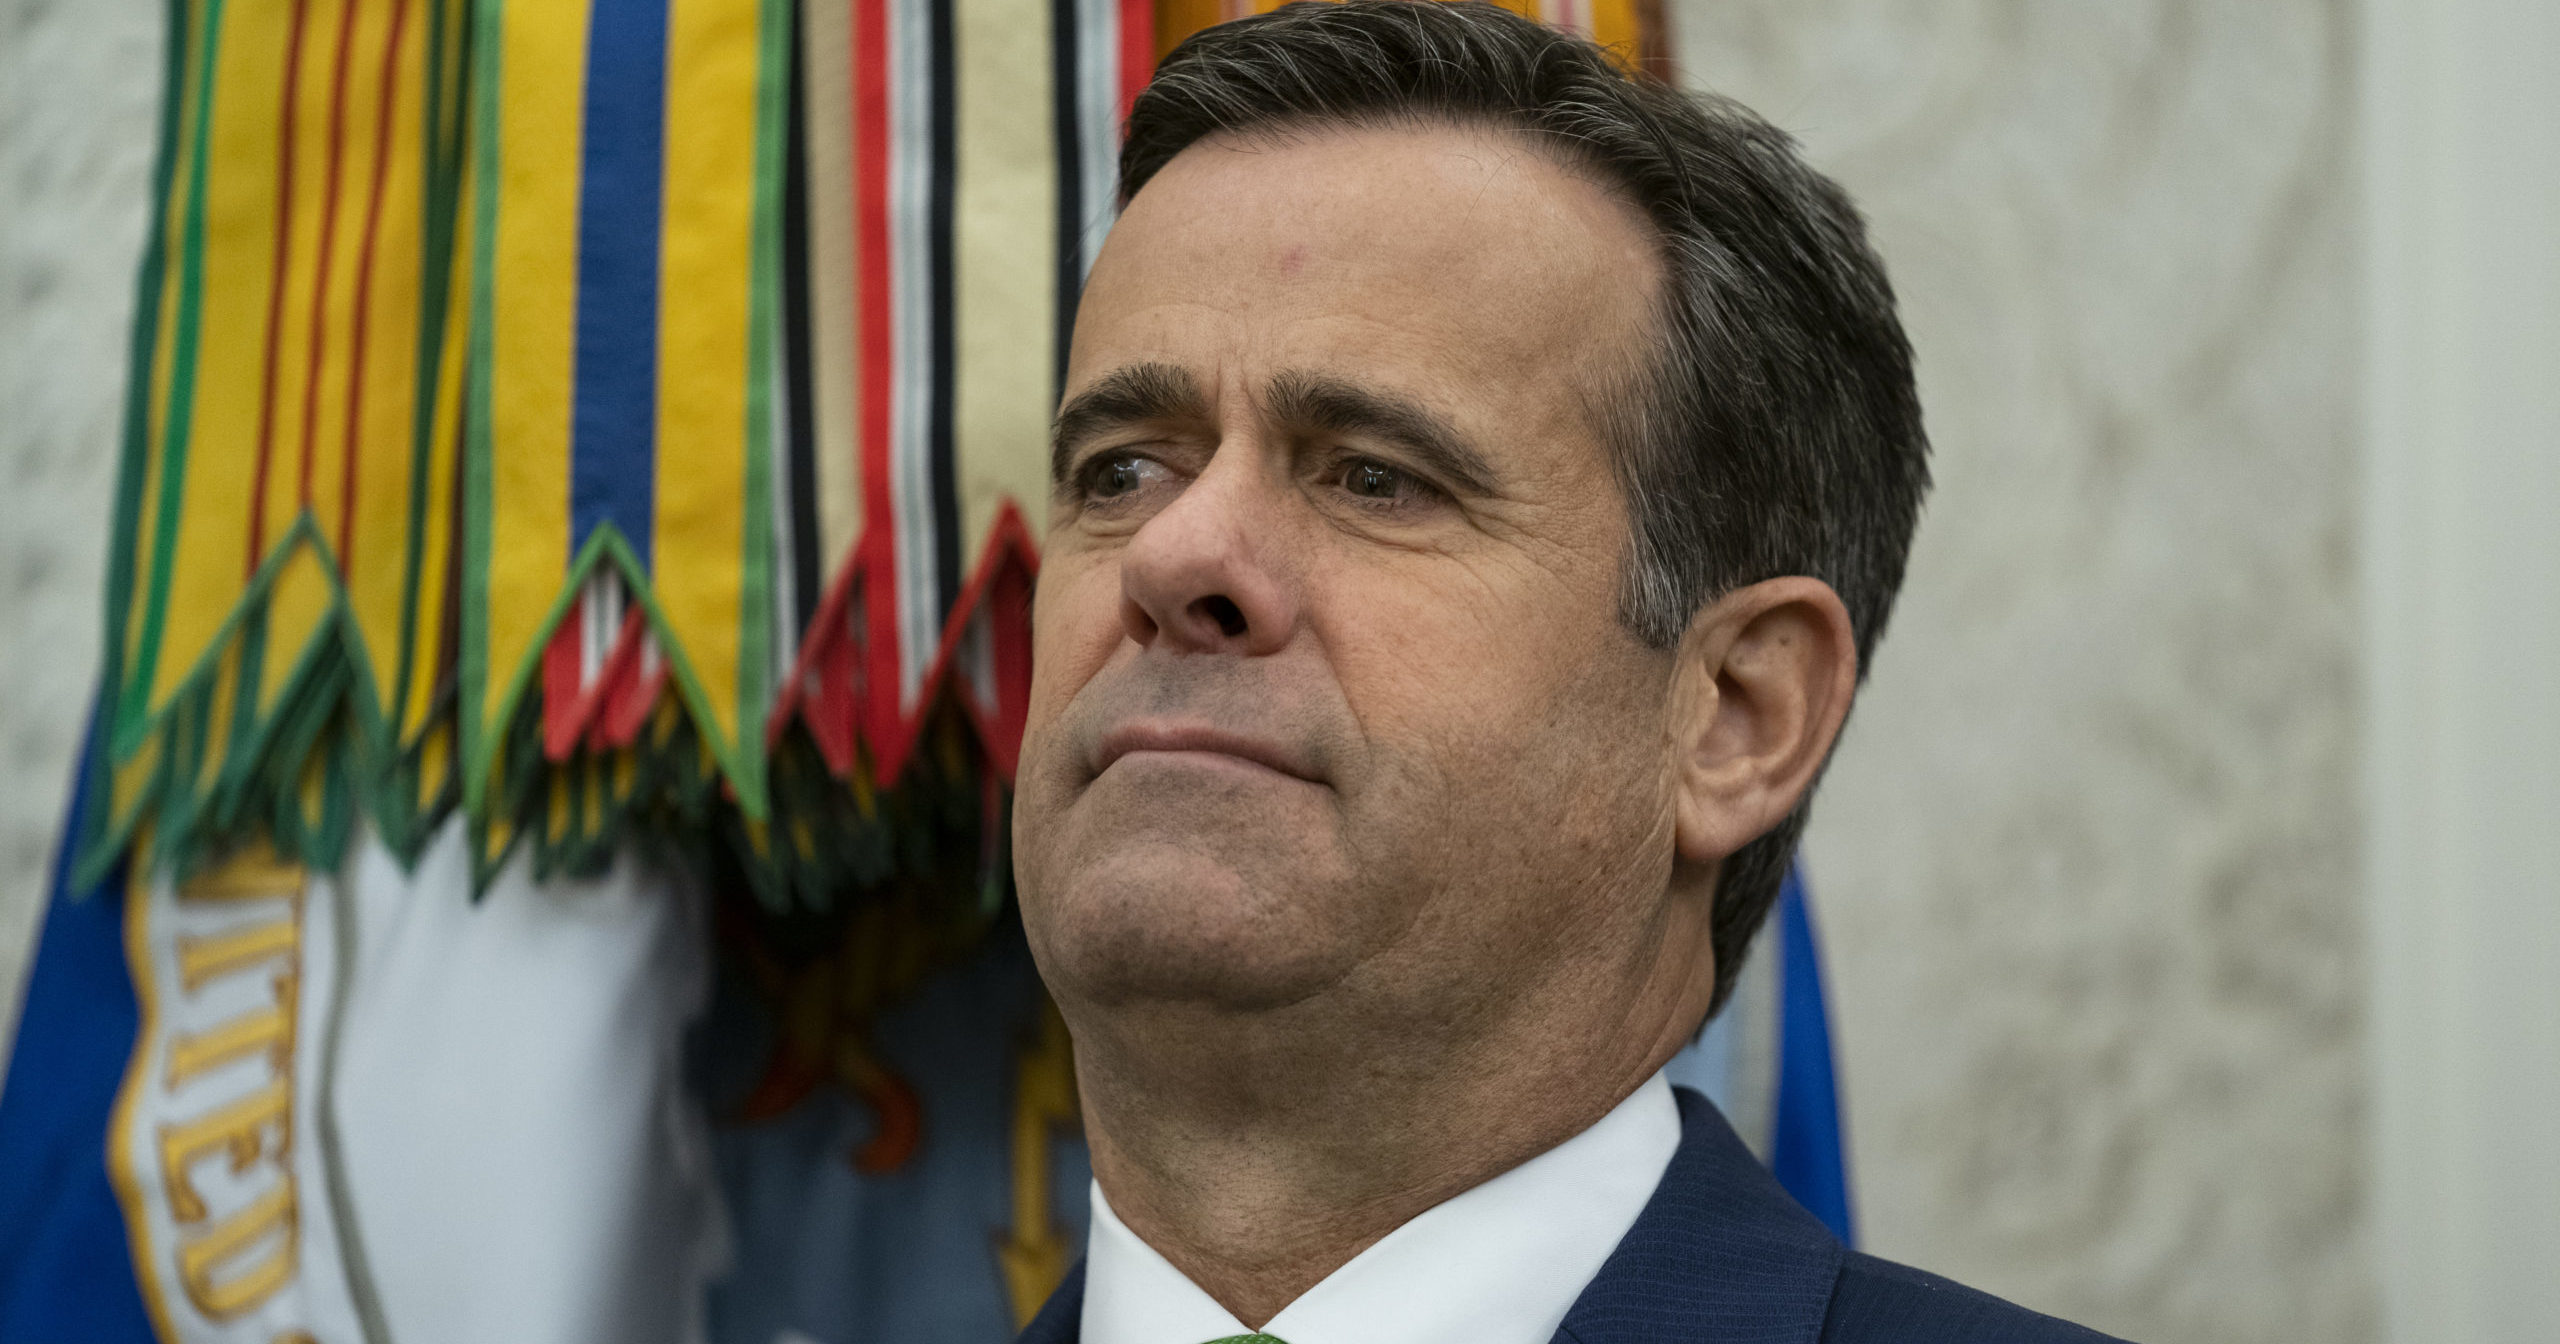 China poses the greatest threat to America and the rest of the free world since World War II, national intelligence director John Ratcliffe said on Dec. 3, 2020.